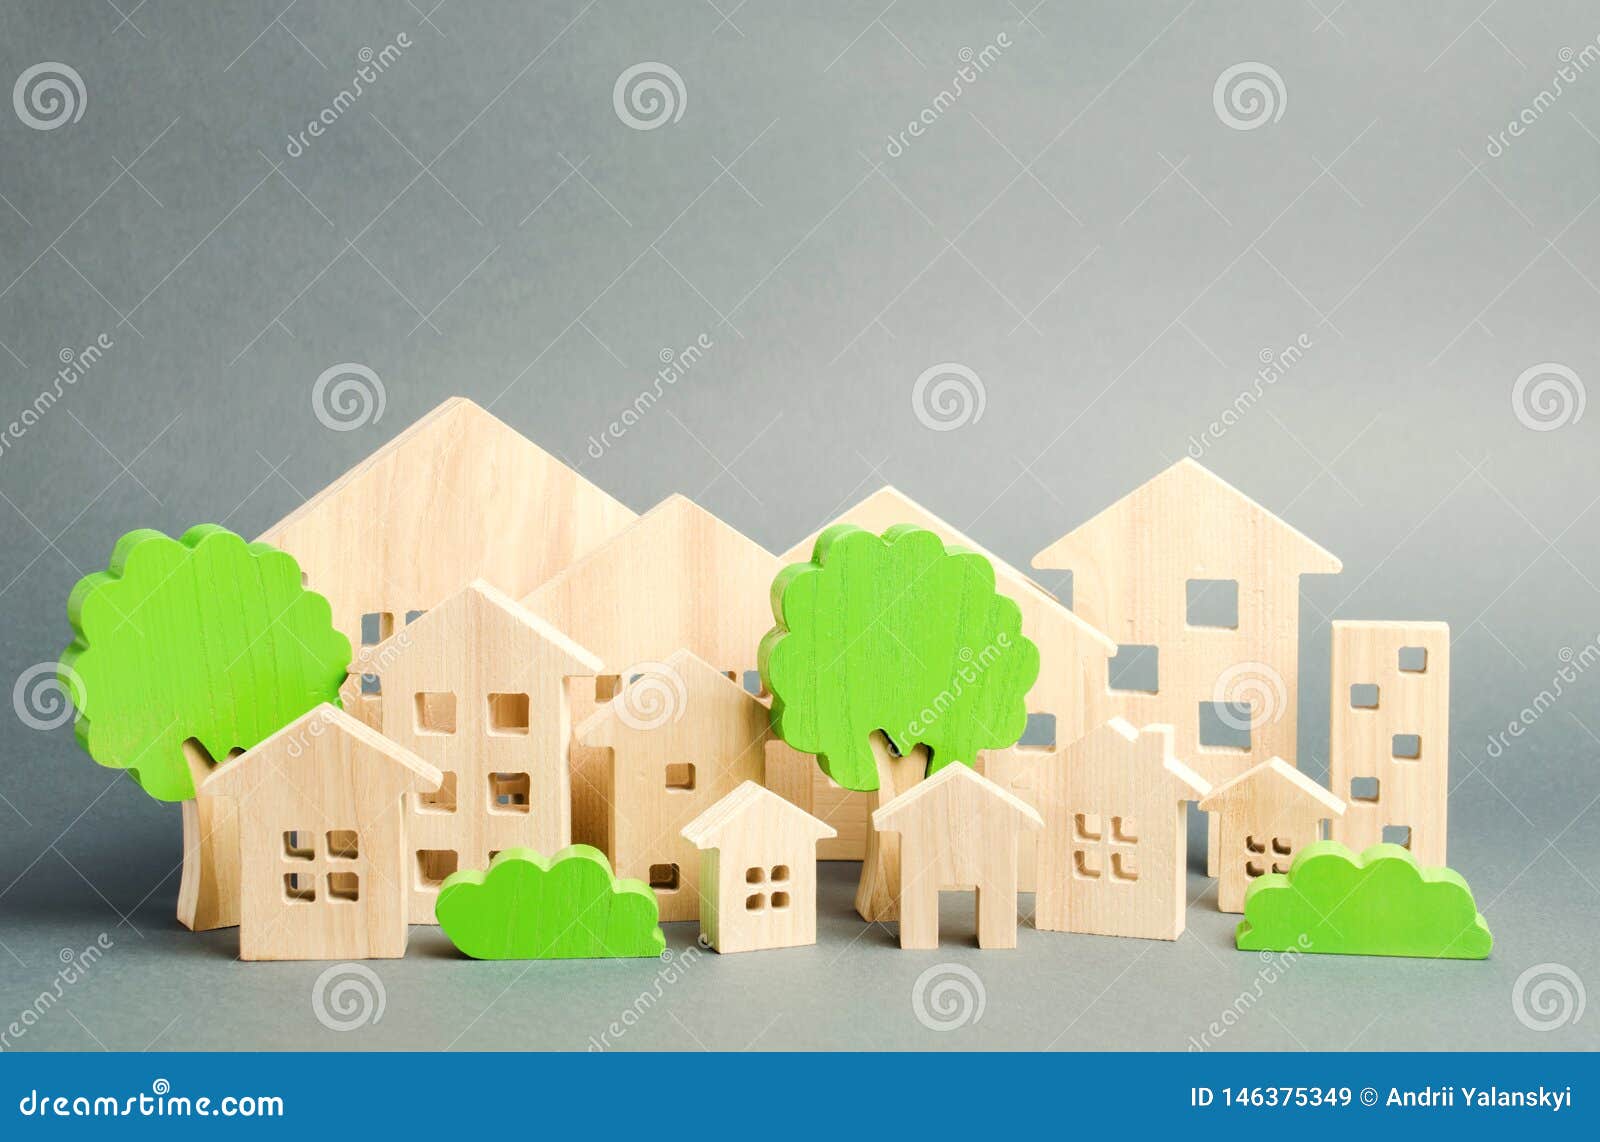 miniature wooden toy houses and trees. real estate concept. architecture in the city. infrastructure. affordable housing.